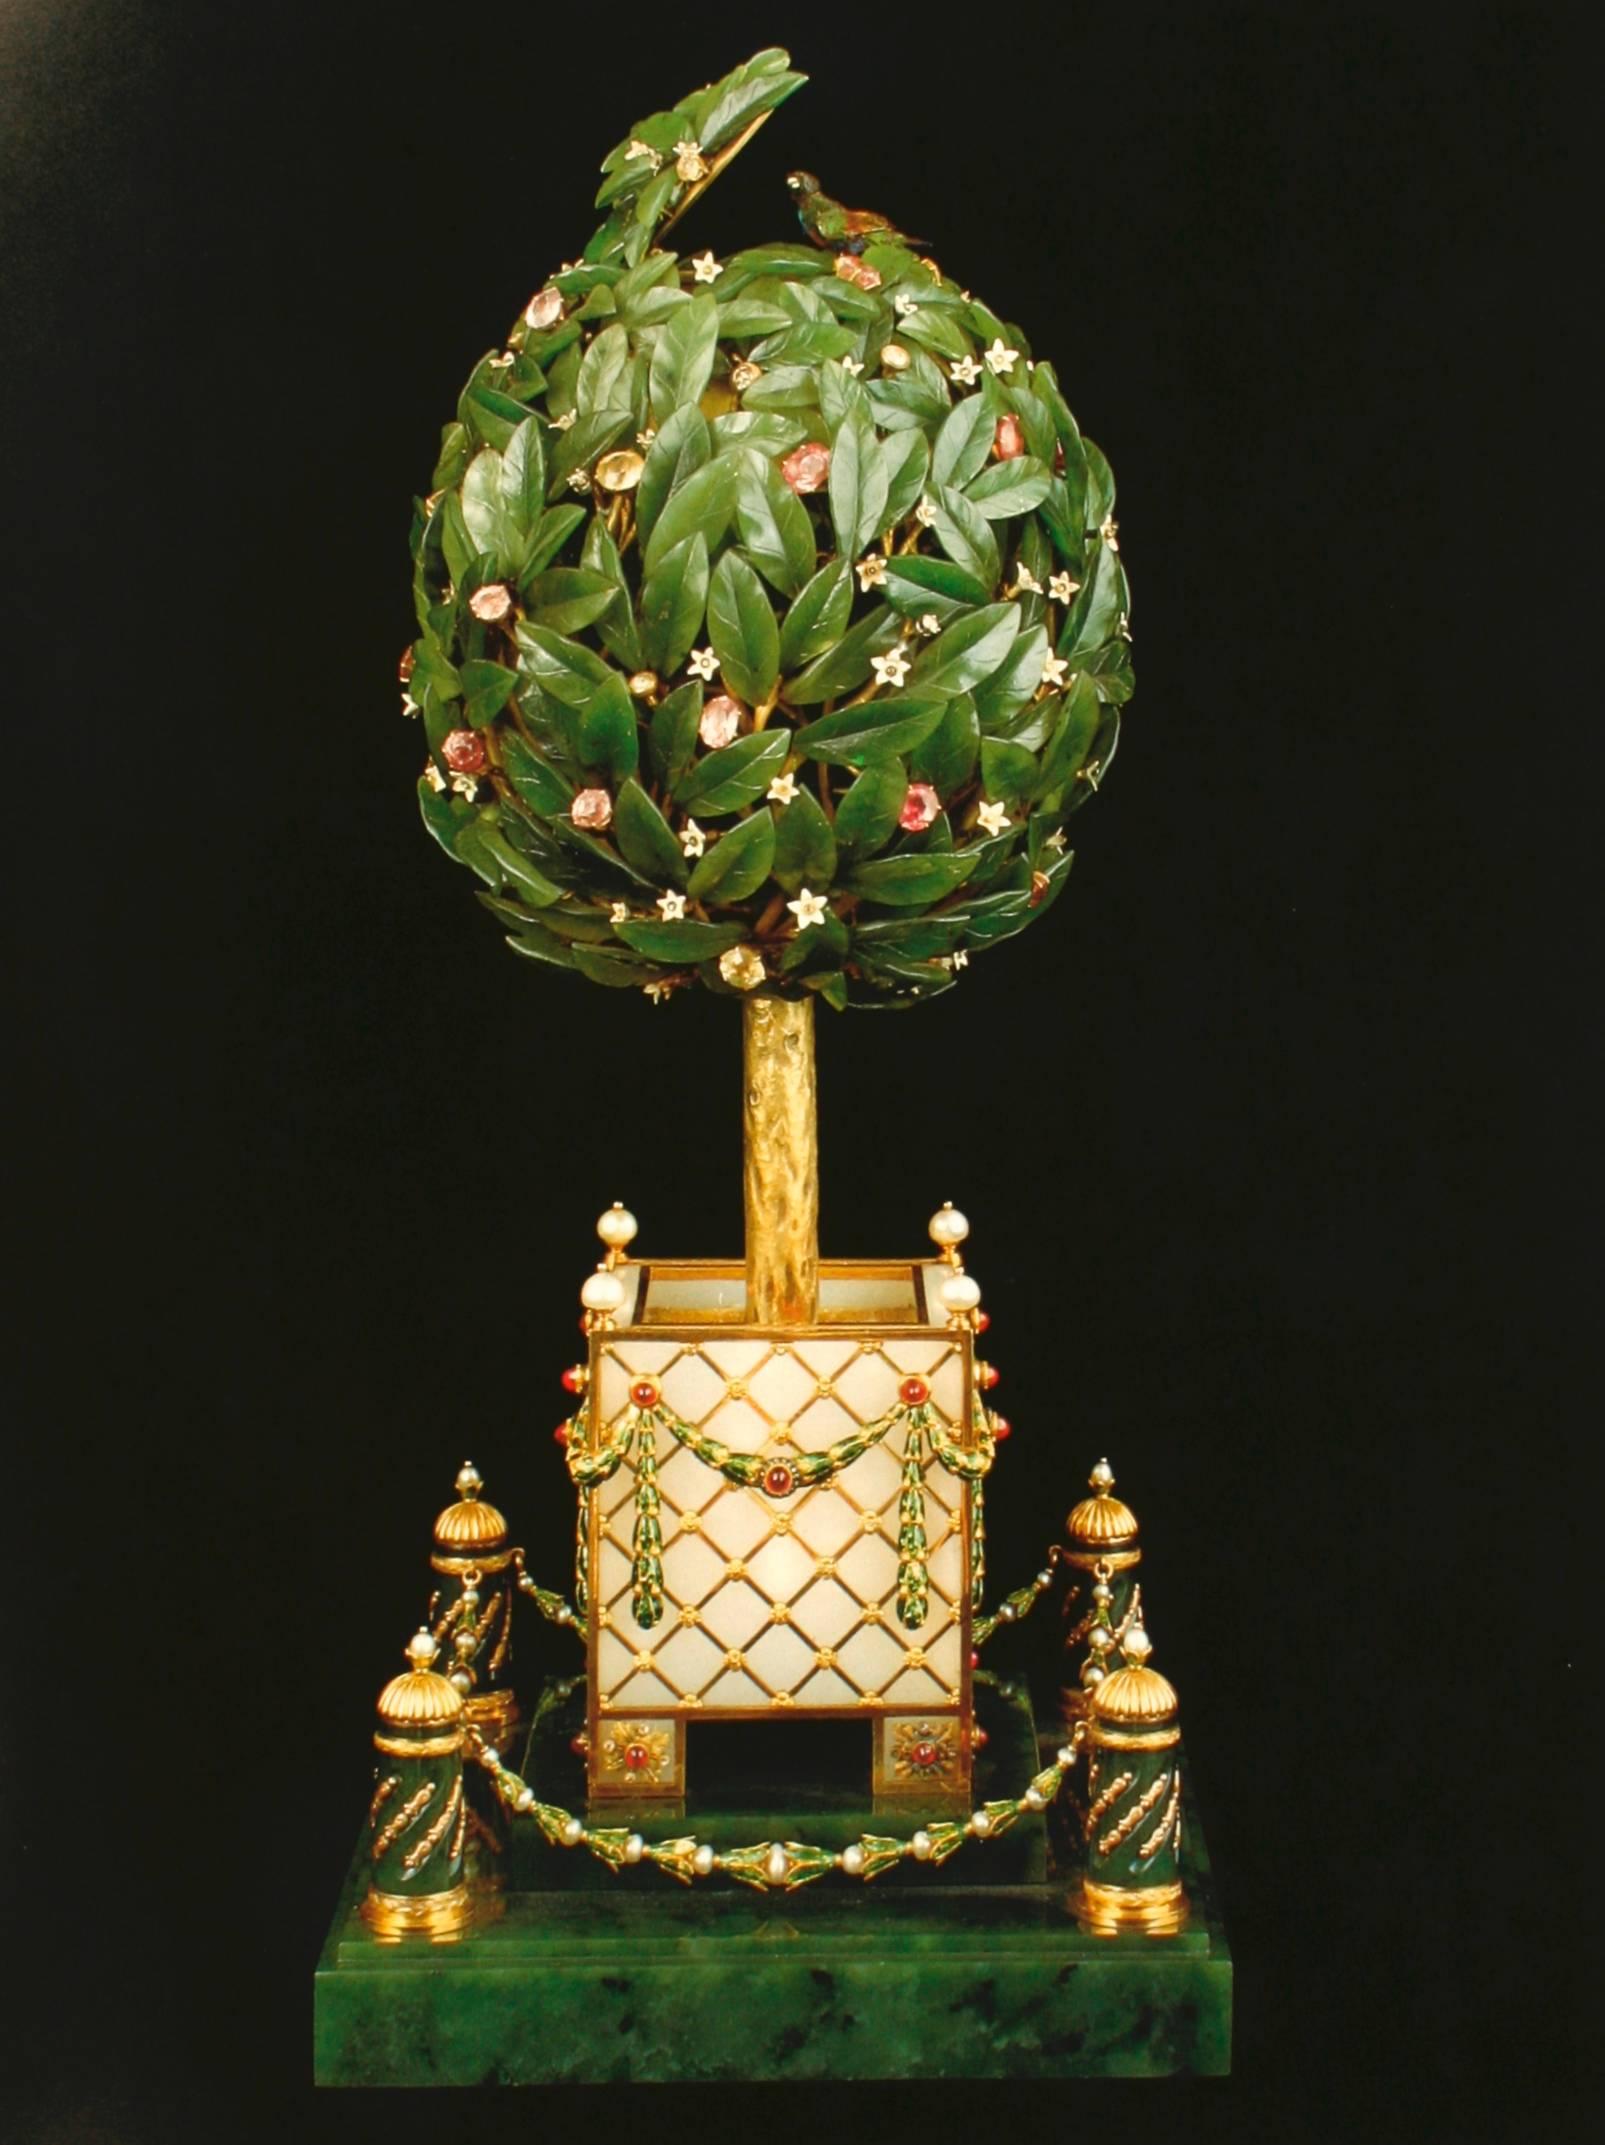 Paper Fabergé, Imperial Eggs and Other Fantasies by H. Waterfield and C. Forbes